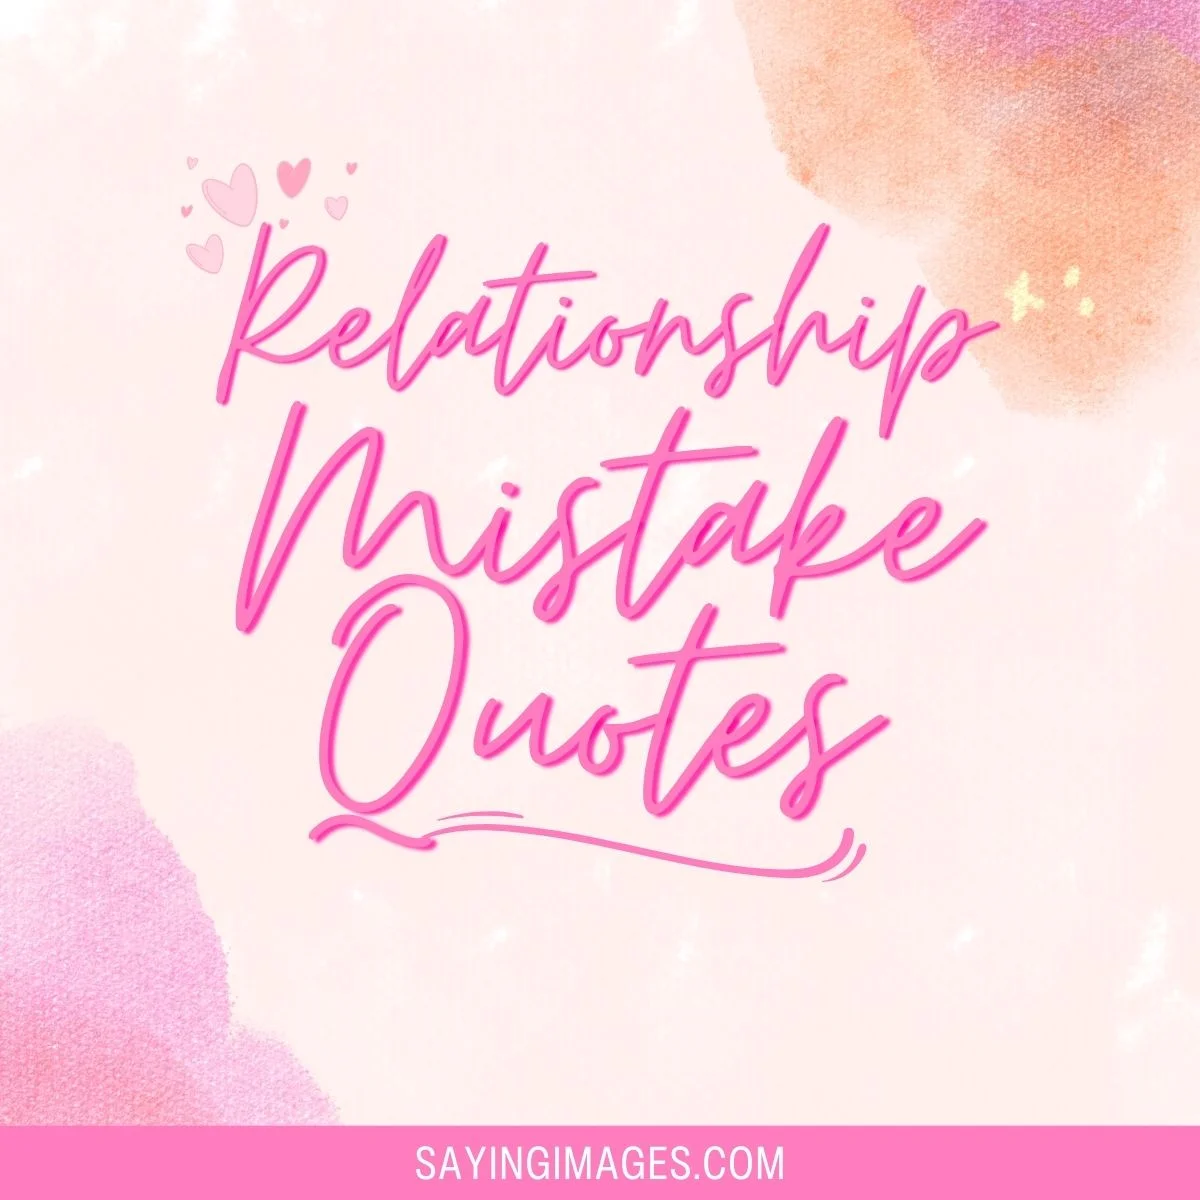 Wise Quotes On Common Relationship Mistakes